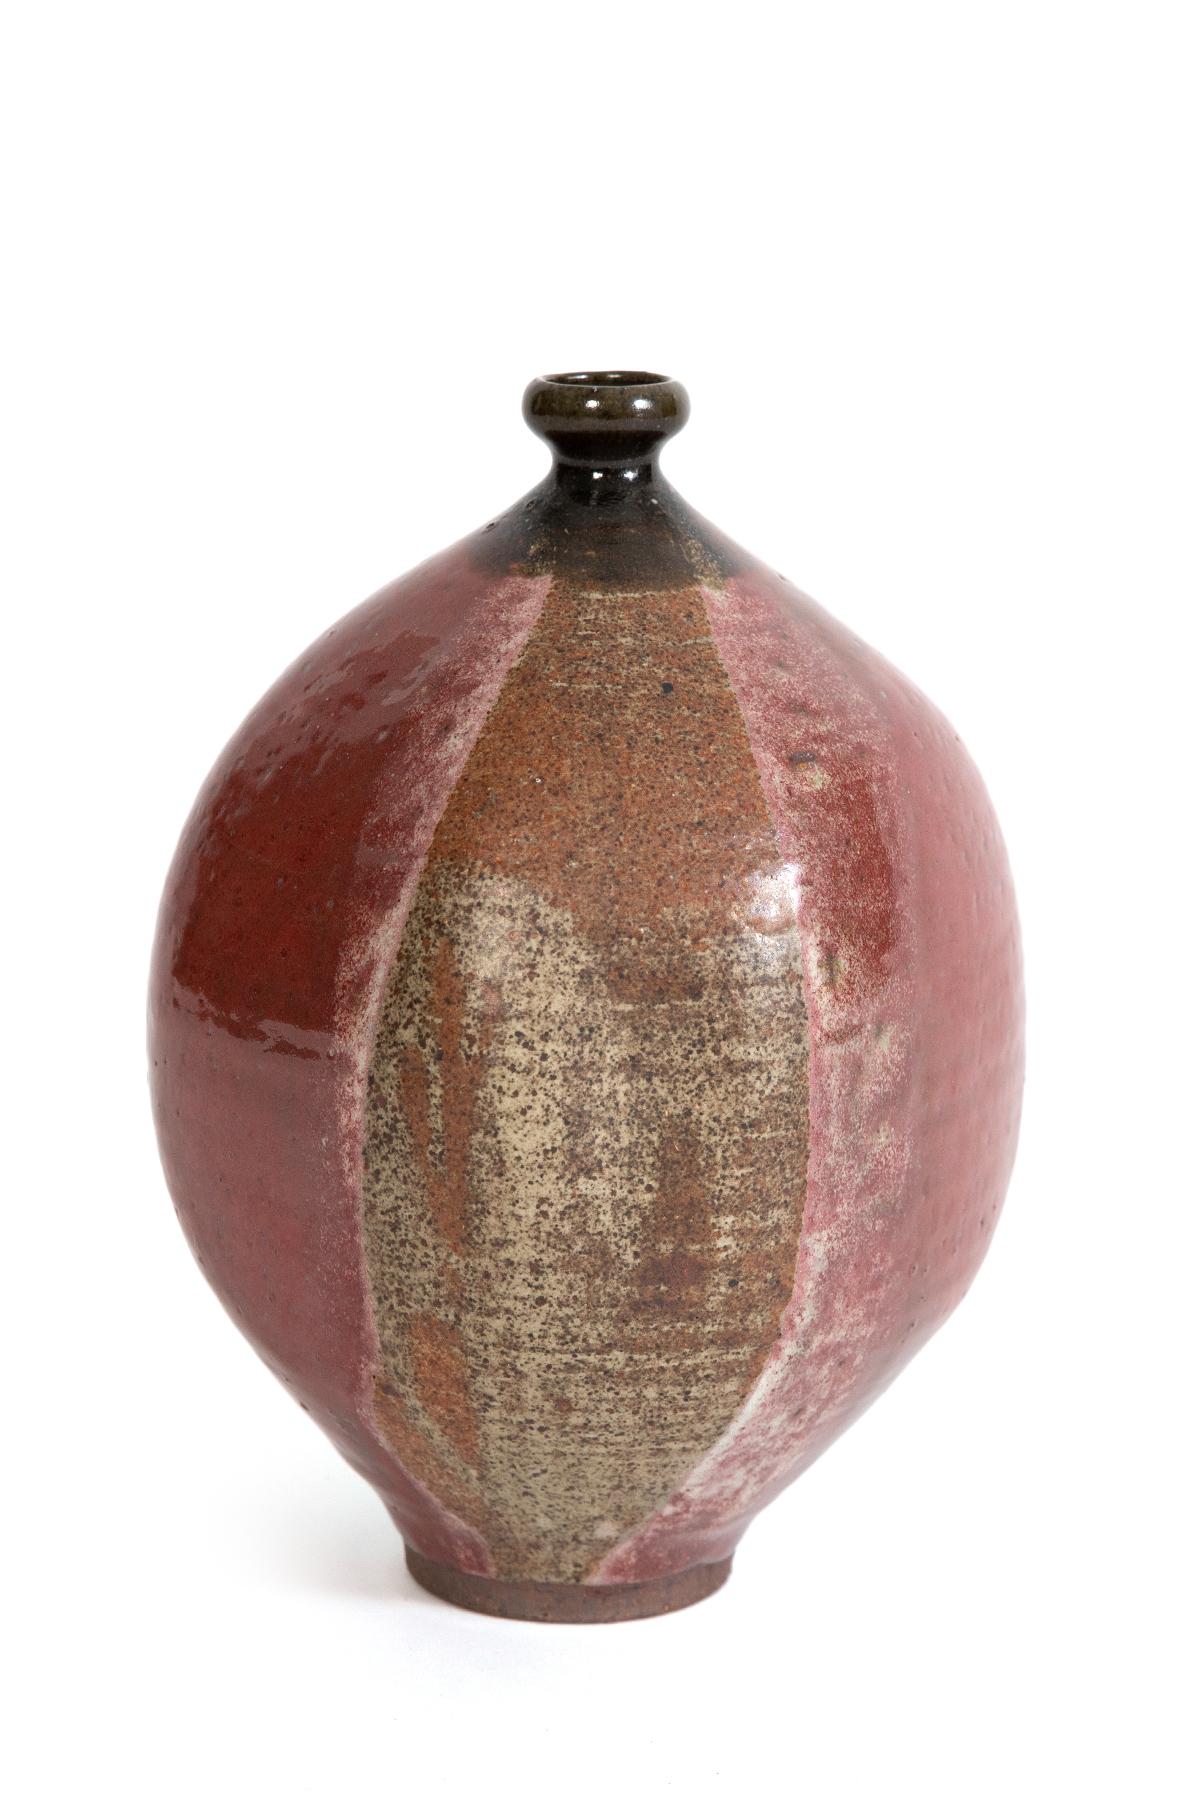 A 1960s multi-colored vessel by master ceramics craftsman Renzo Faggioli with signature on the bottom.
Mr. Faggioli teaches ceramics at The Moravian College in Bethlehem, PA and the Baum School of Art. His original ceramics education came from the